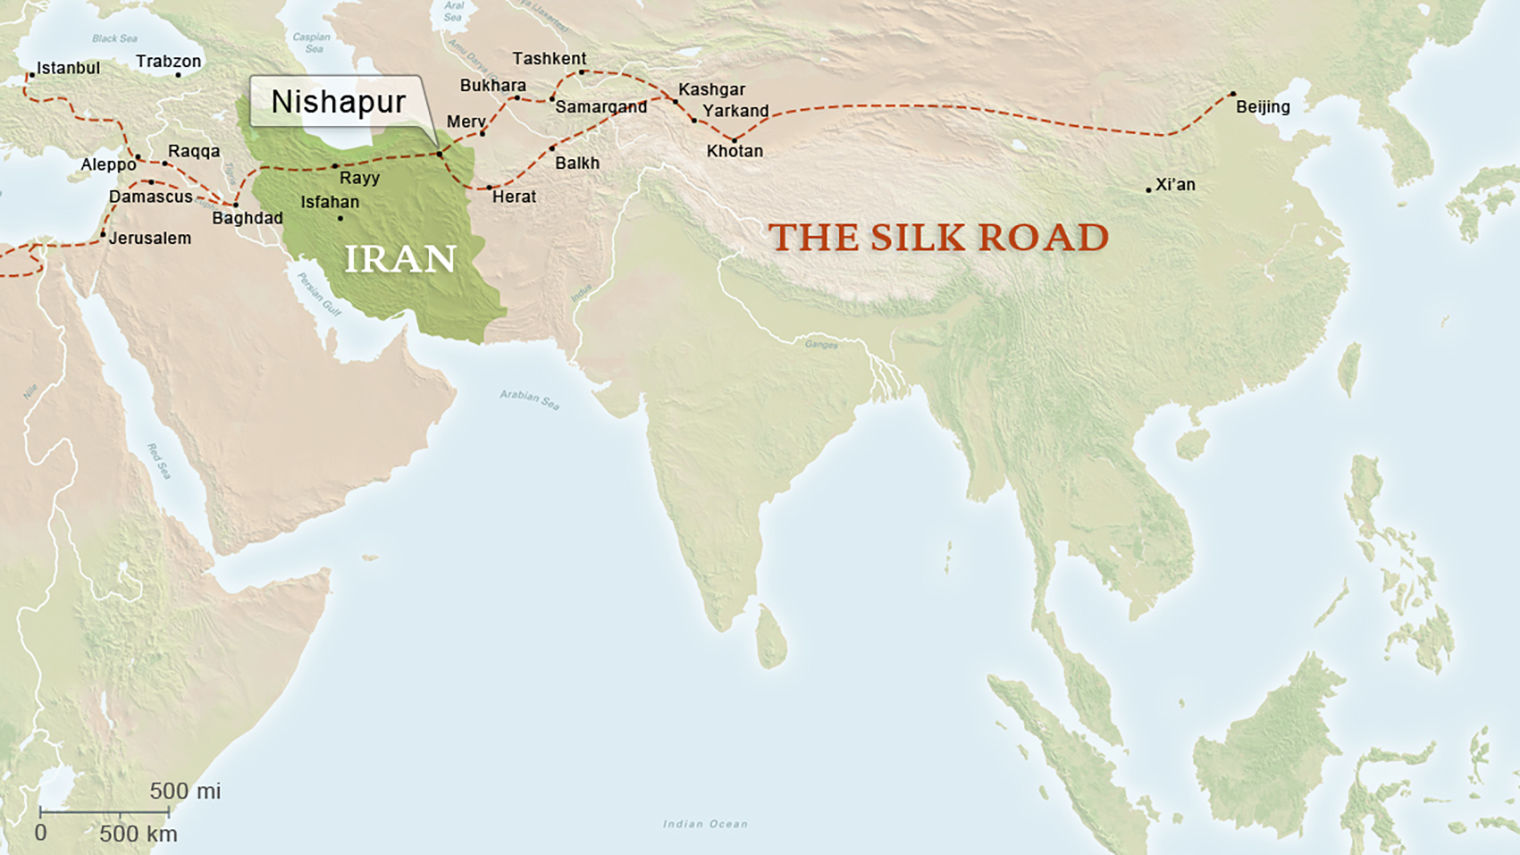 Map of the Silk Road trade route with Iran highlighted in green with a dot on the Northeast showing the location of Nishapur along the route